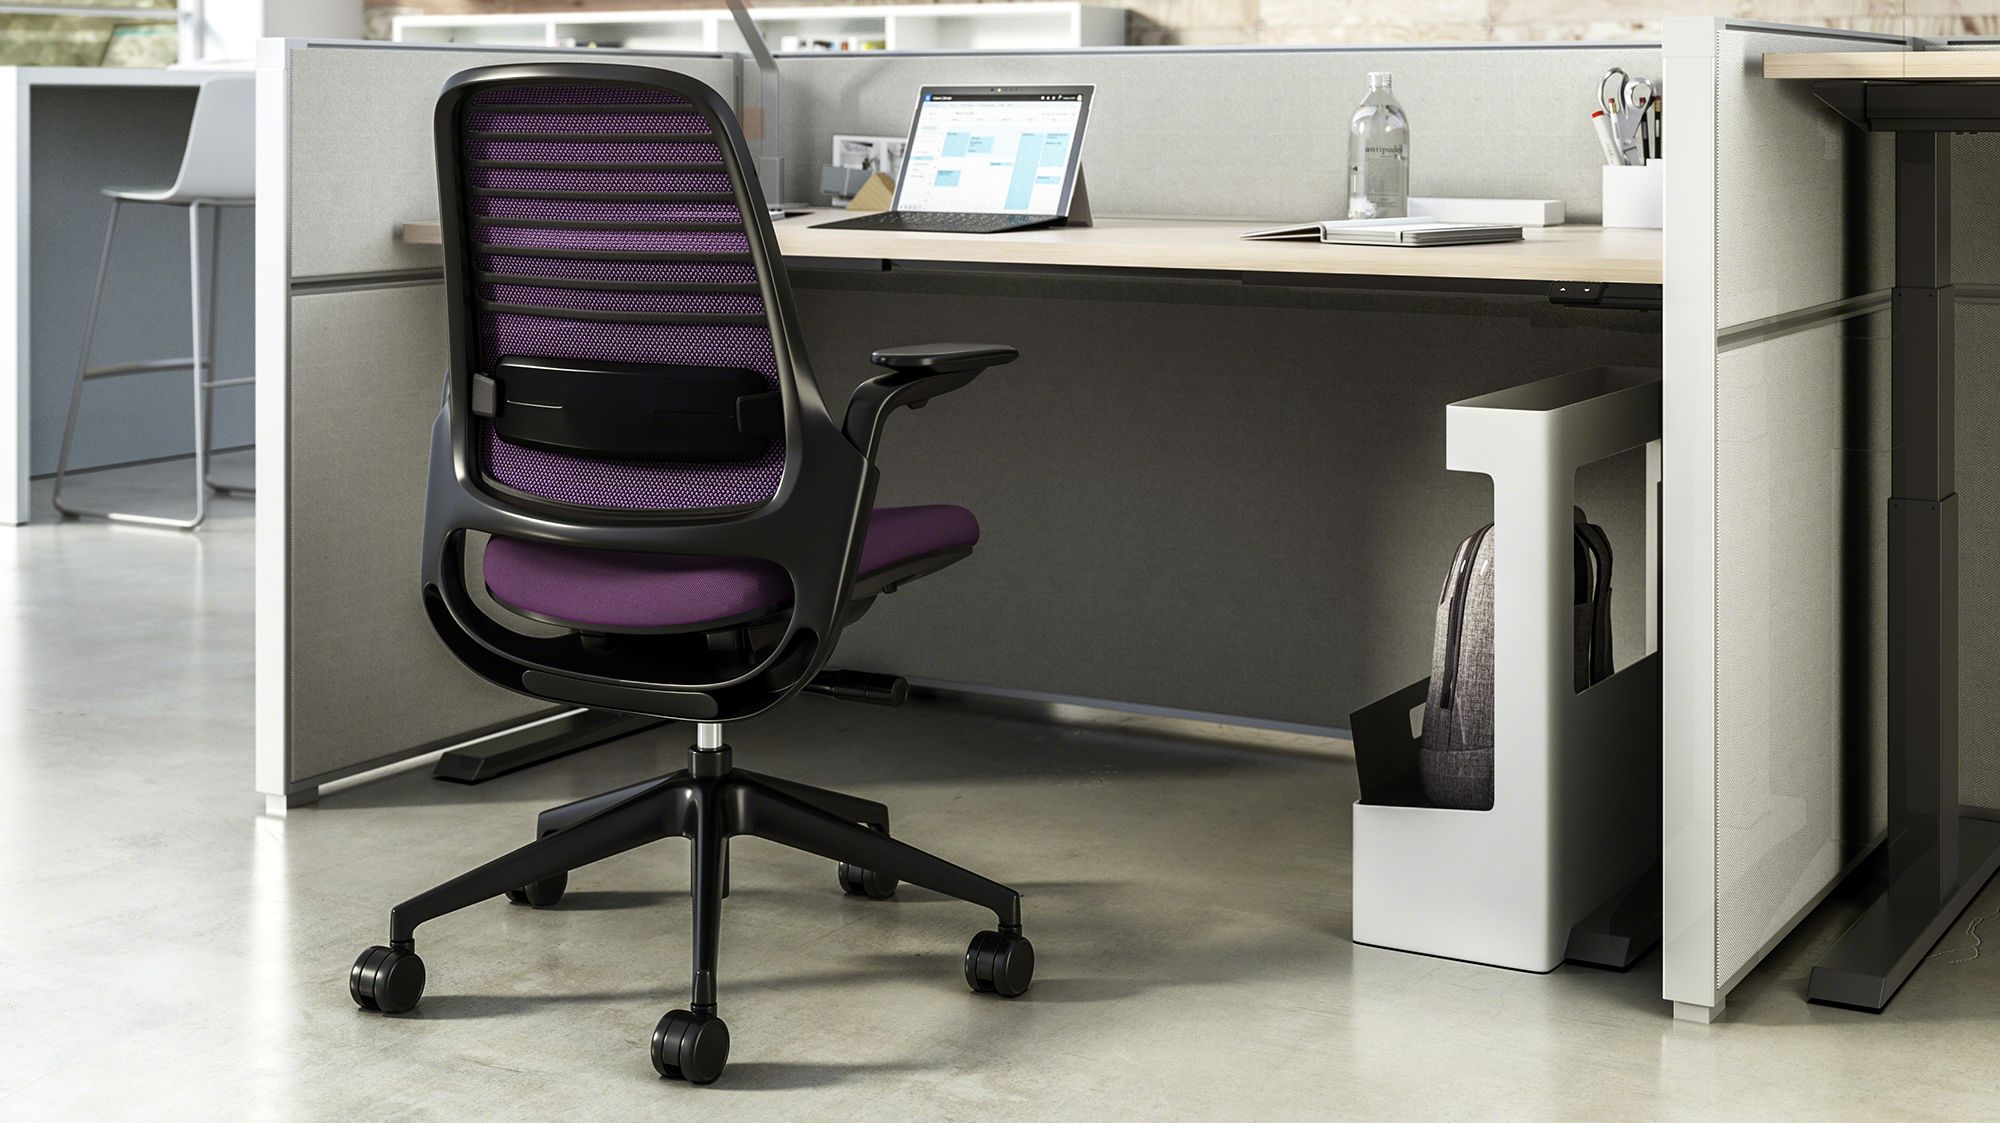 Steelcase sale: Save on our pick for best office chairs | Underscored